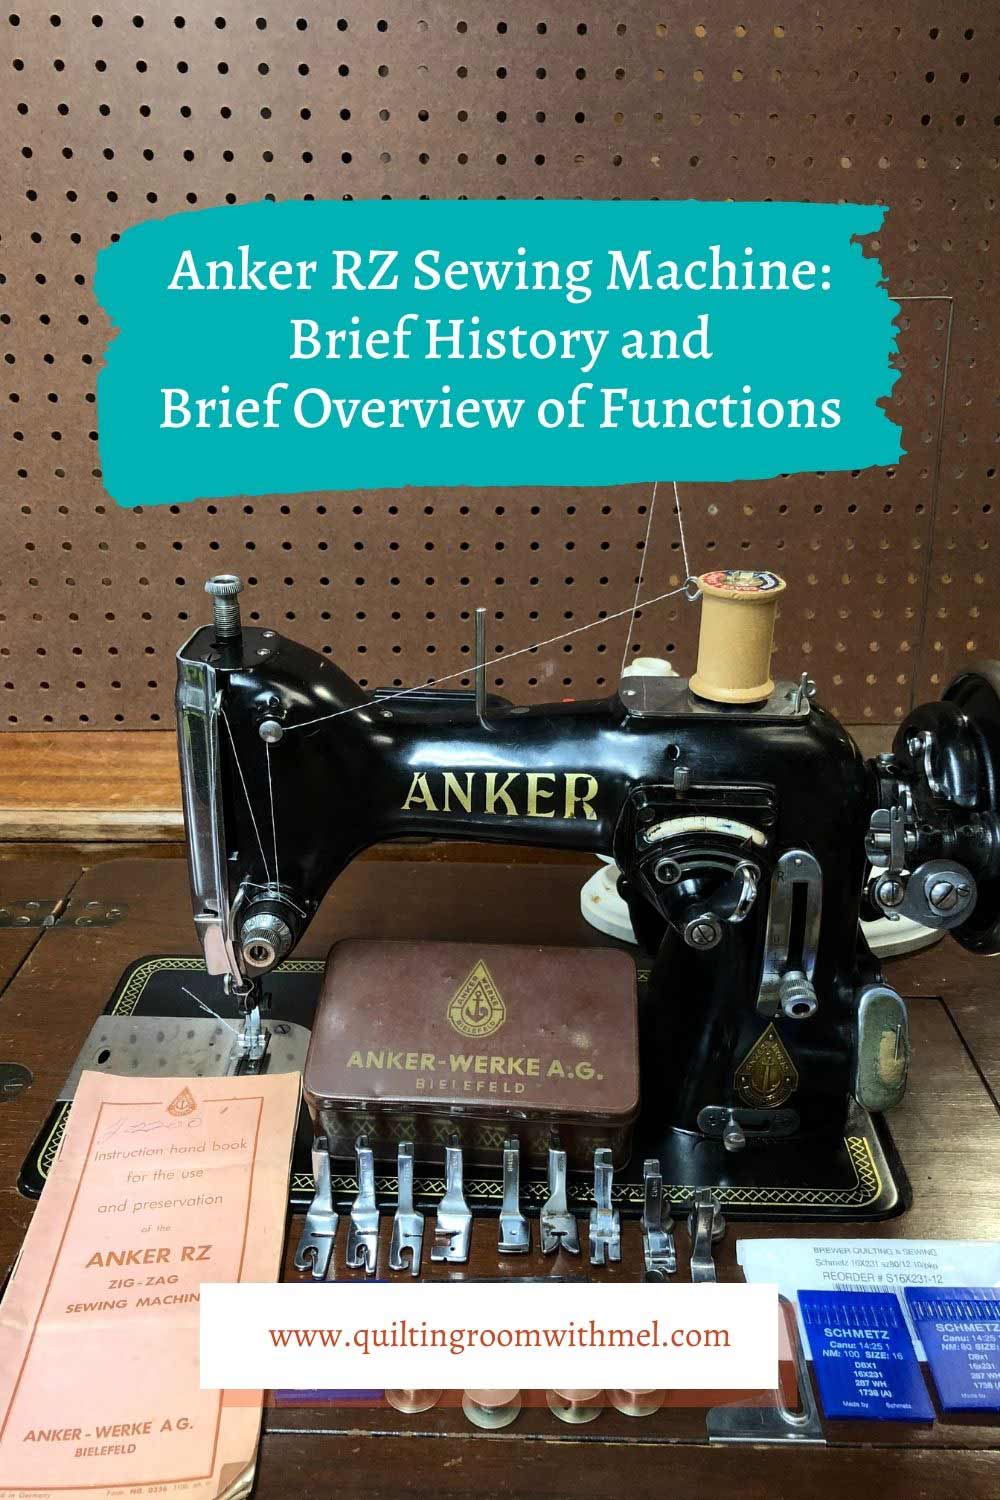 This nifty German-made machine is a beauty and has a brief history as well as an overview of its functionality. Plus, there's even a manual available for download! How cool is that? If you're in the market for a vintage sewing machine, this one should definitely be at the top of your list.